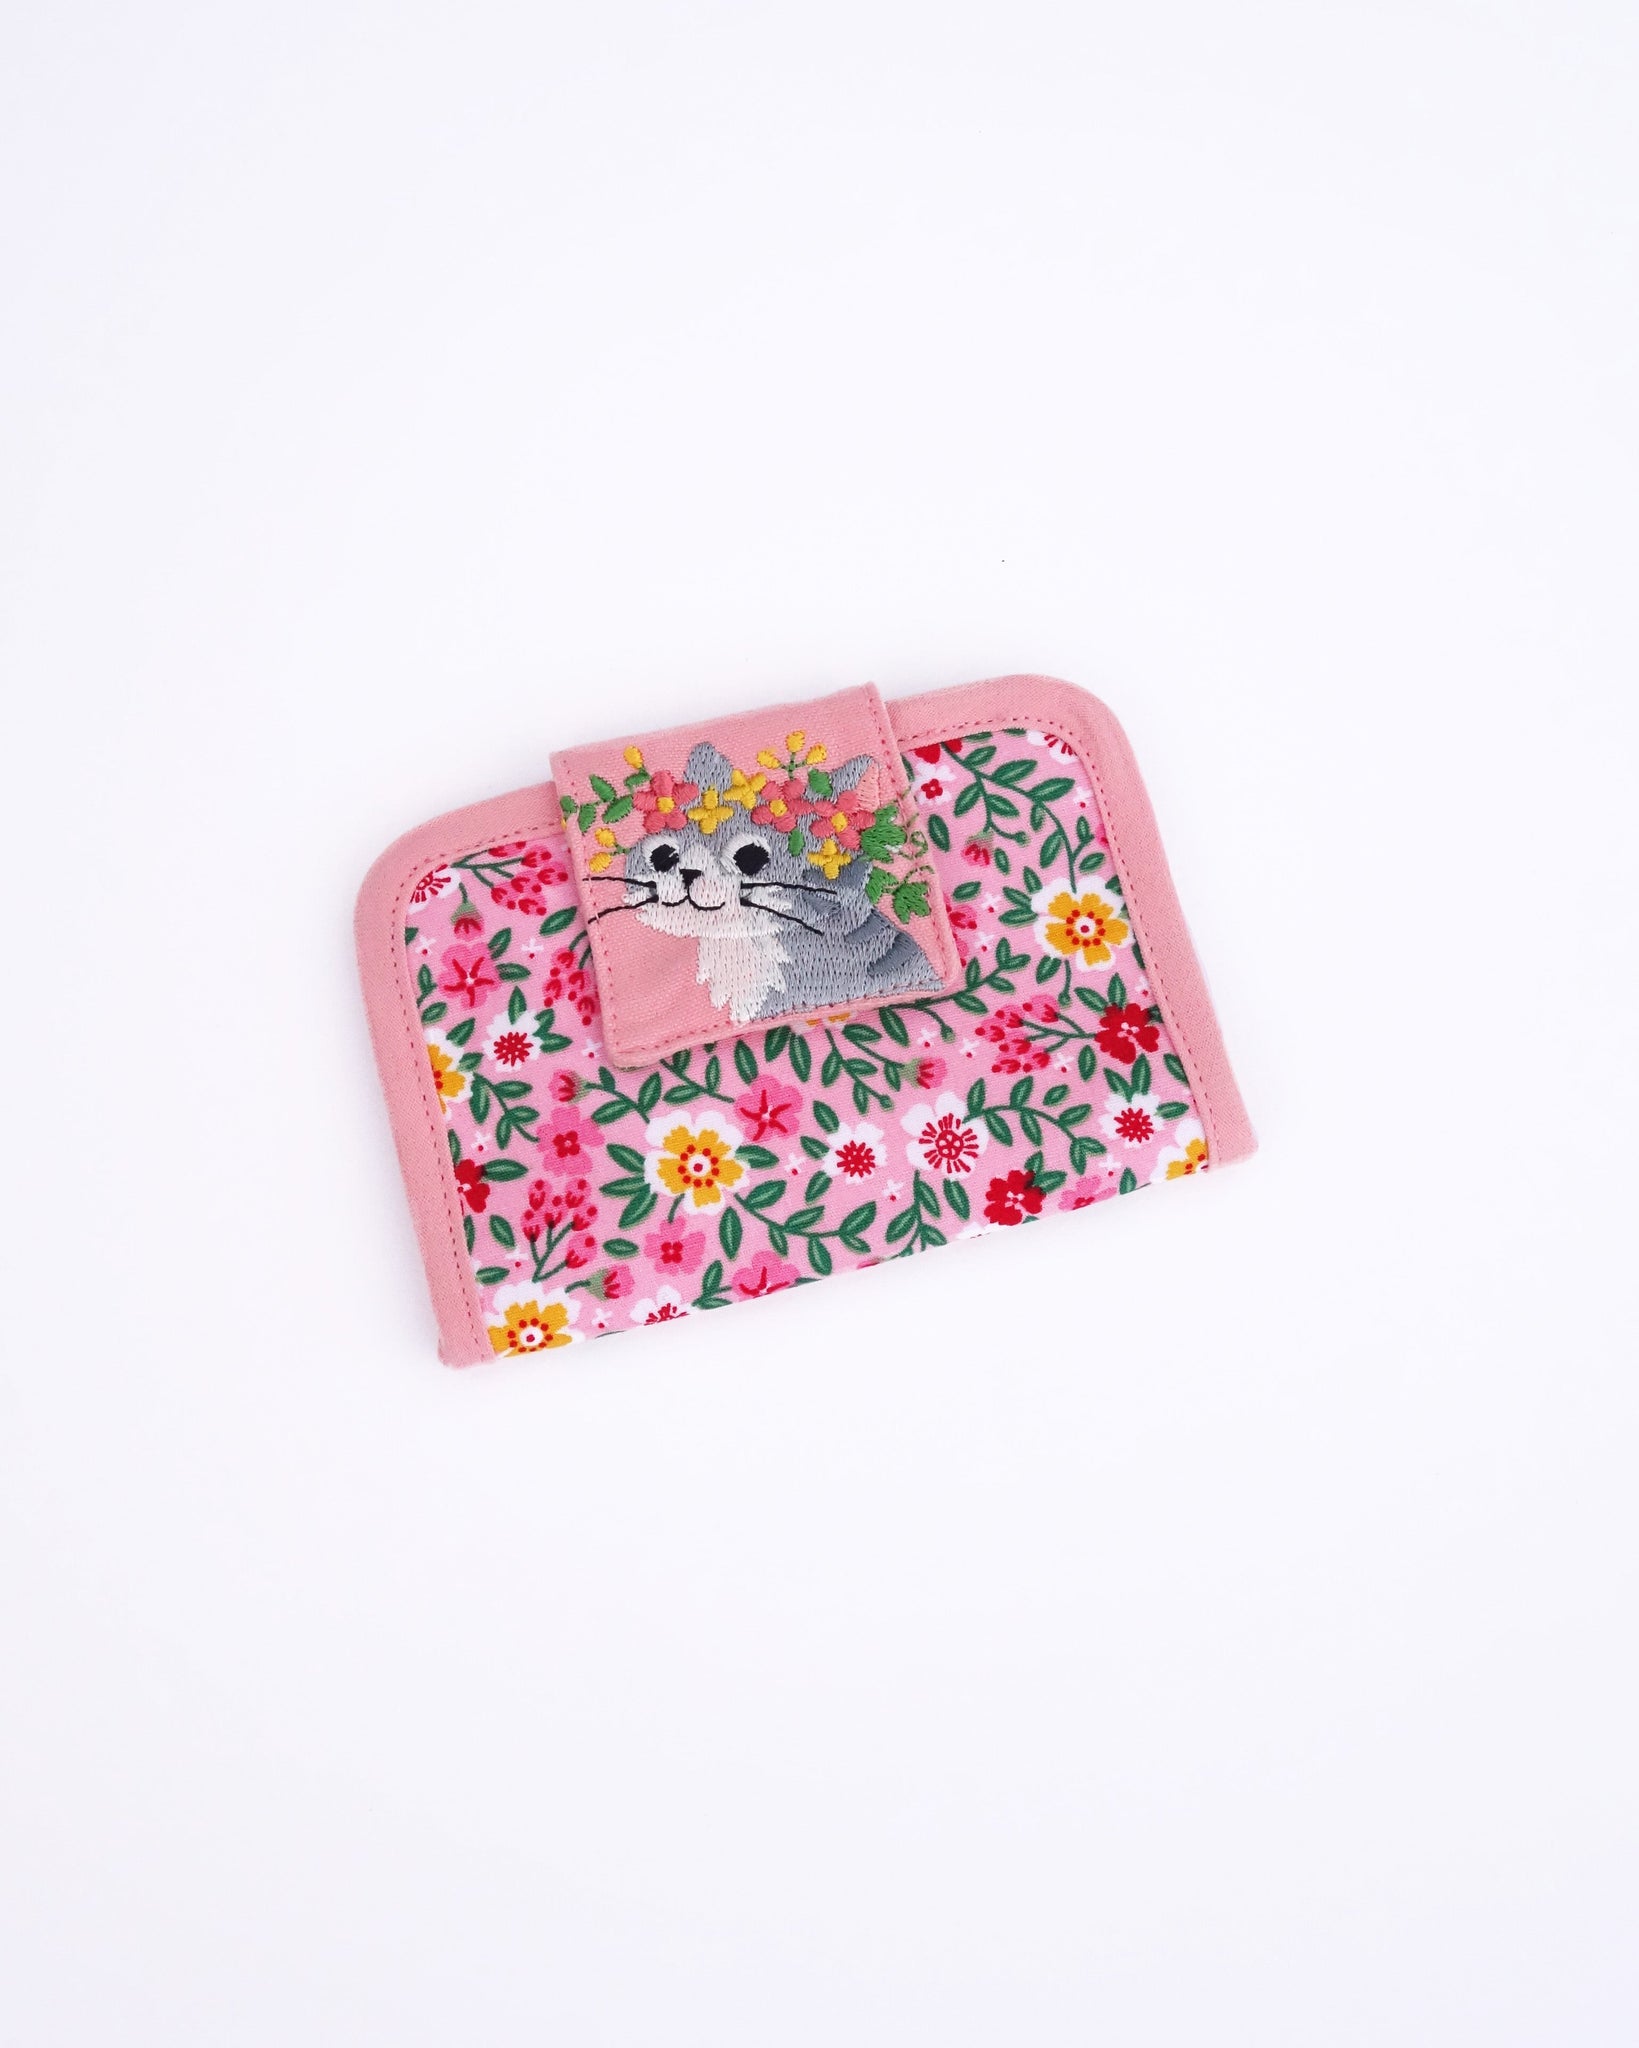 Cat Card-Case in pink blossoms with cat appliqué, embroidery detail and Velcro flap closure in front view.